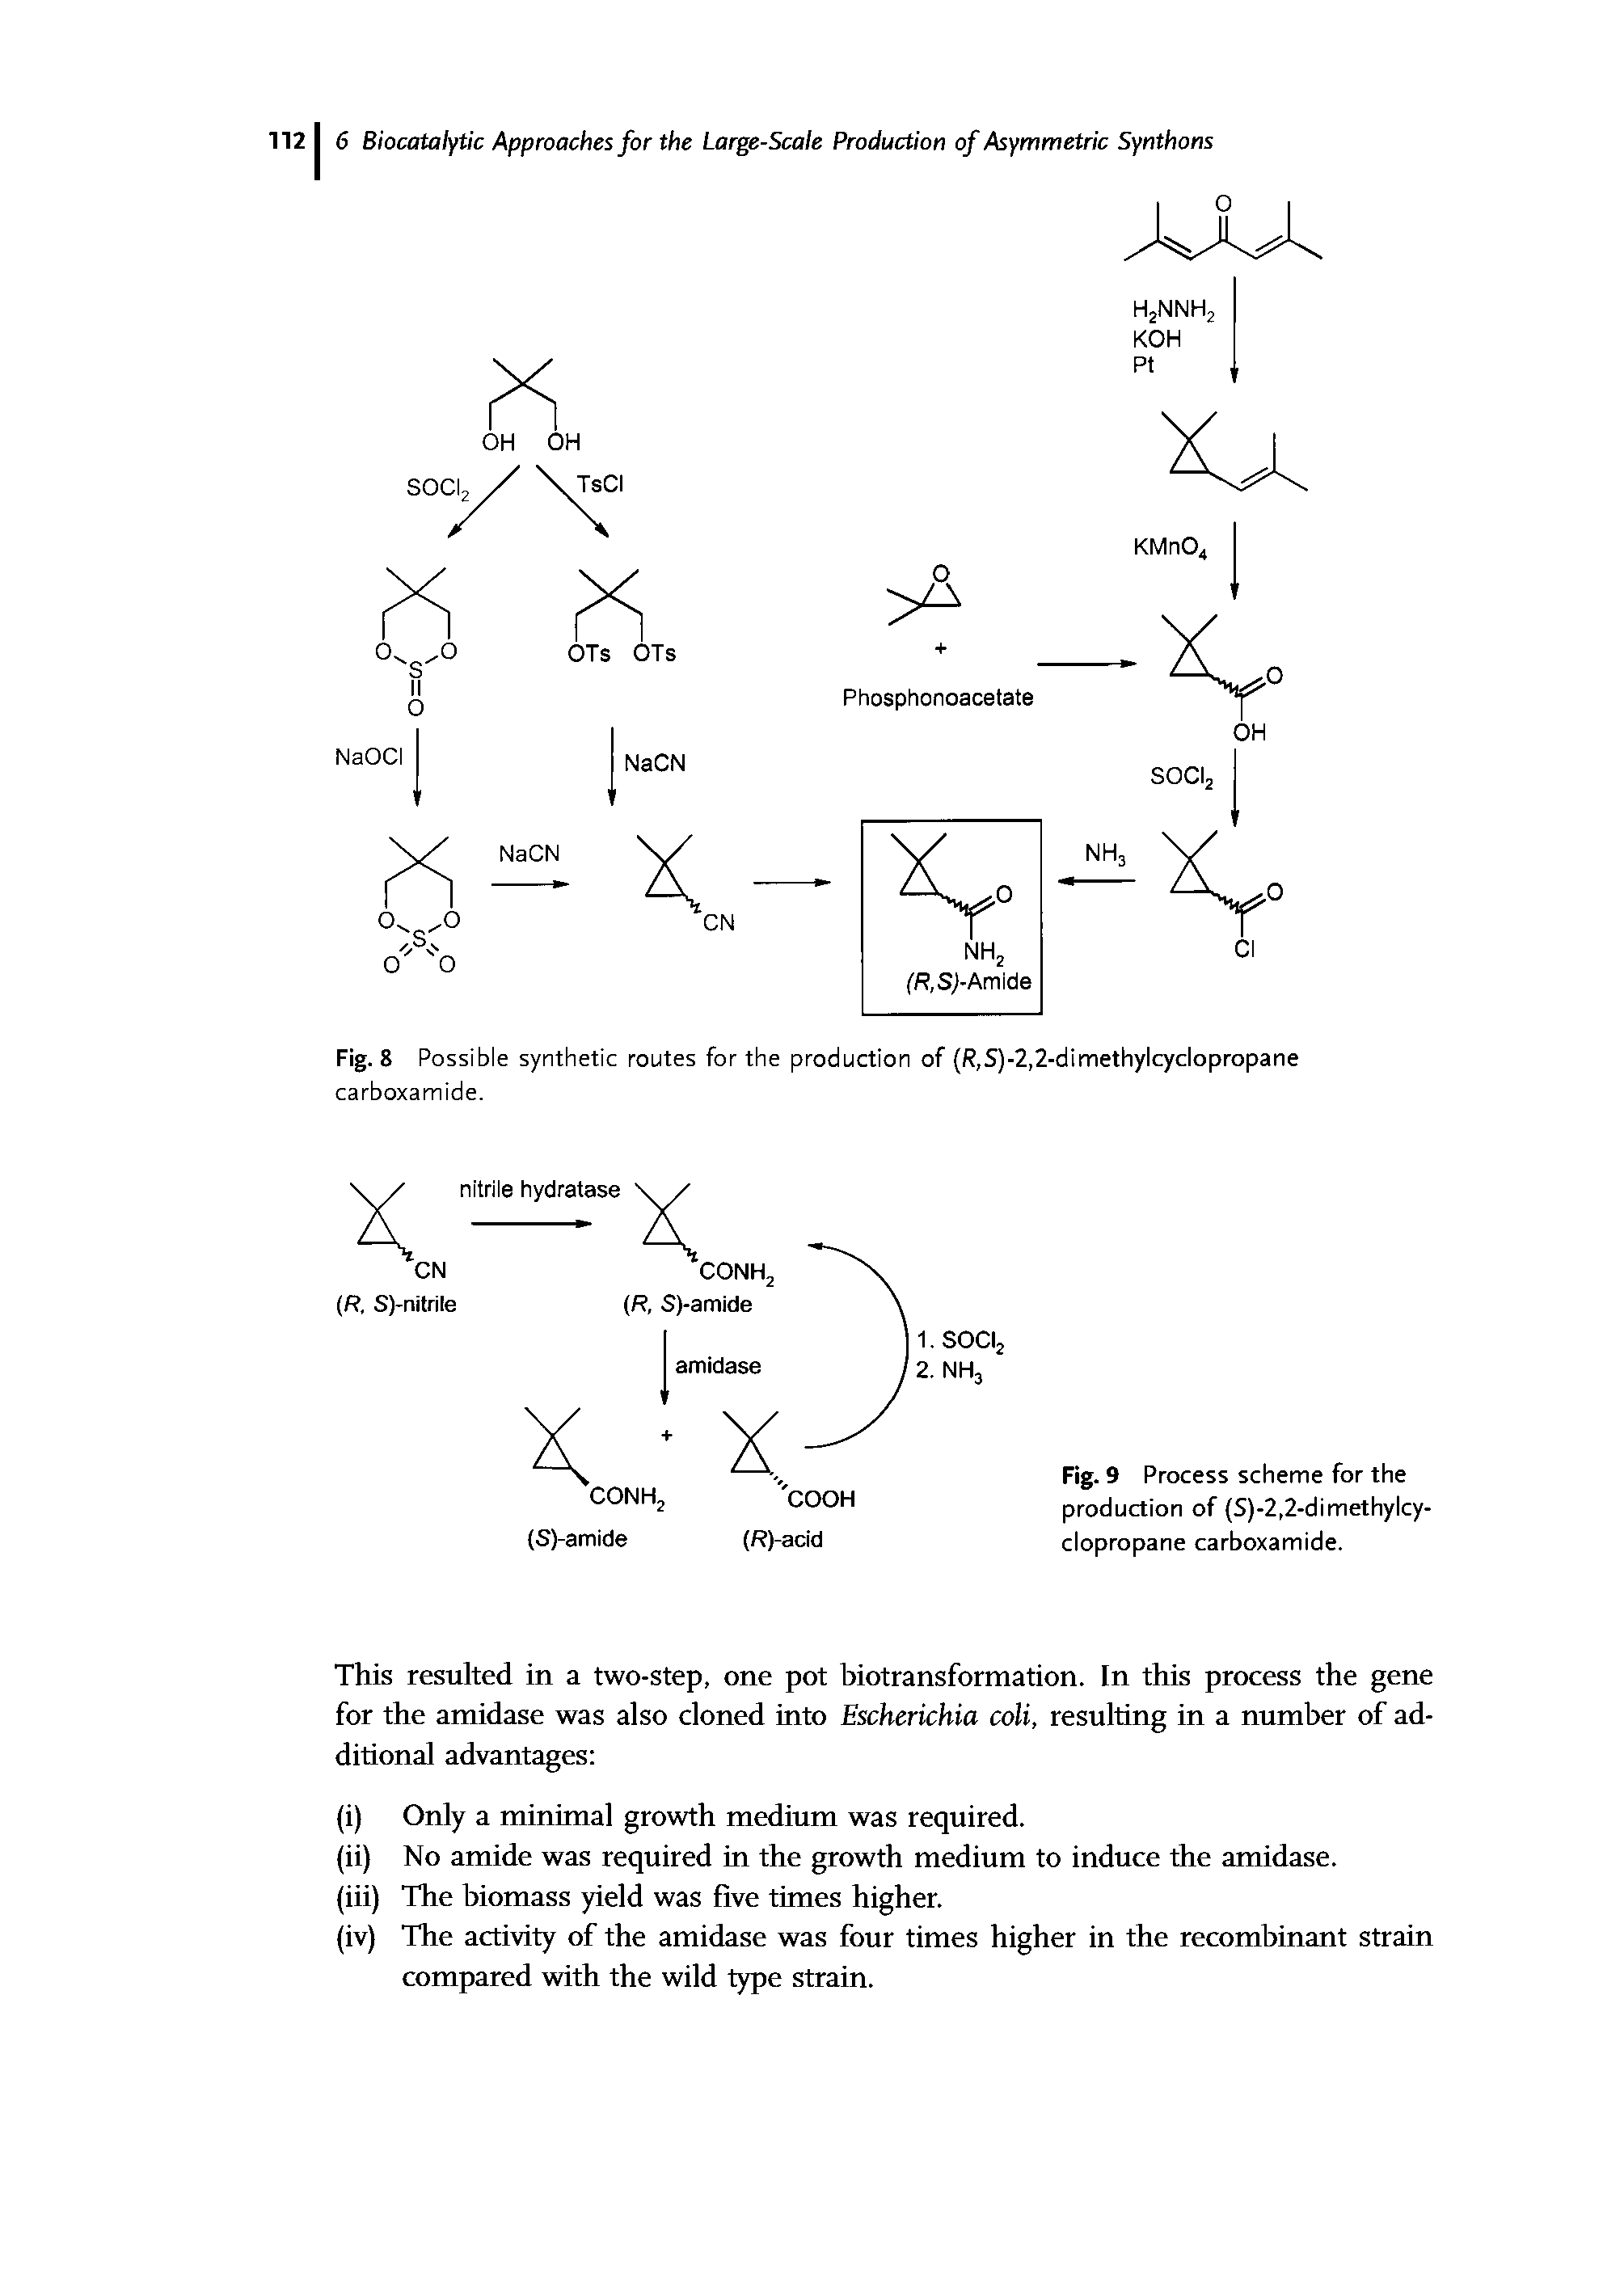 Fig. 9 Process scheme for the production of (S)-2,2-dimethylcy-clopropane carboxamide.